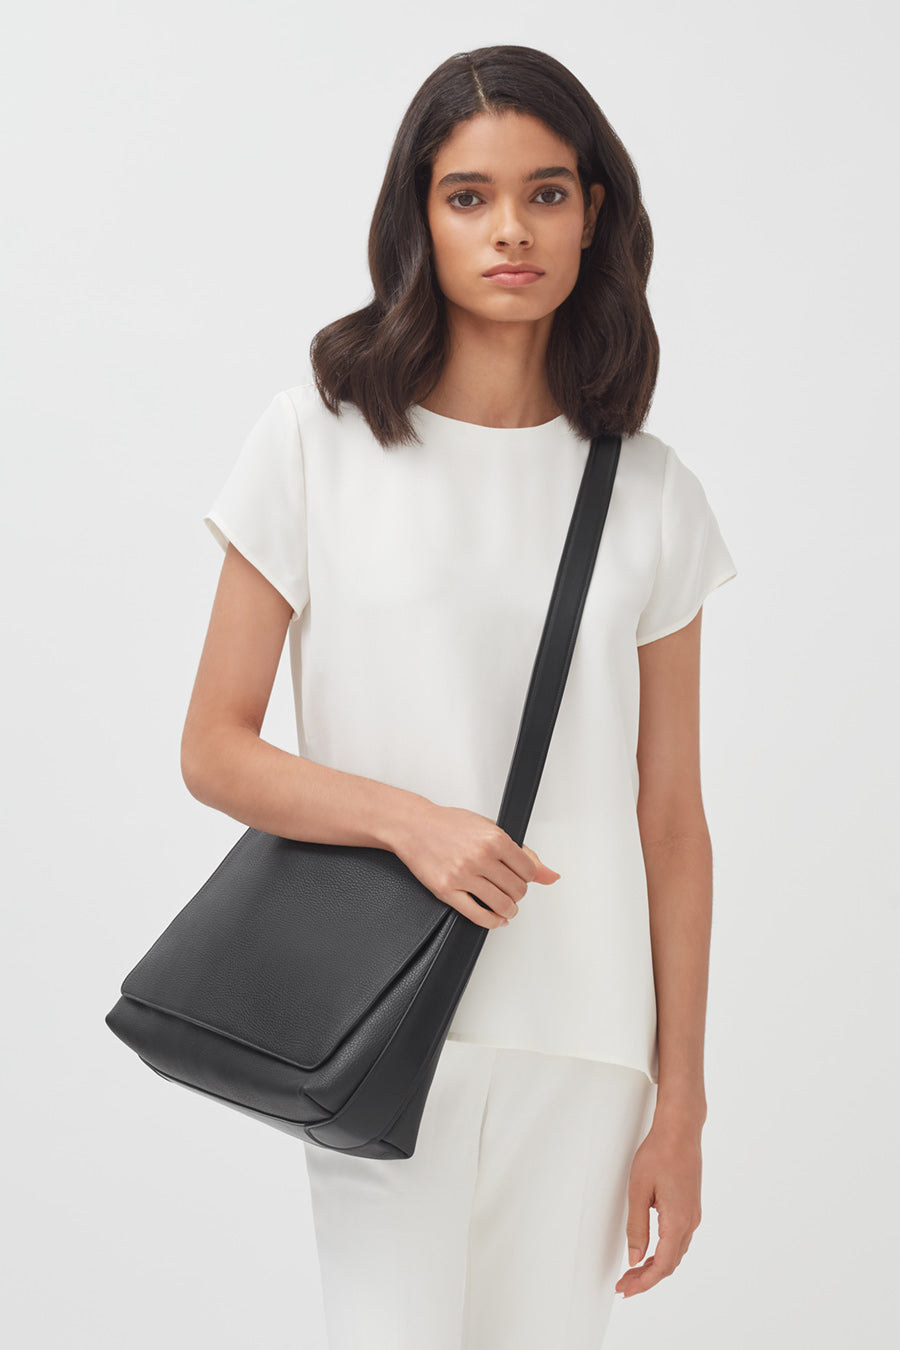 Woman standing with a shoulder bag, looking at the camera.